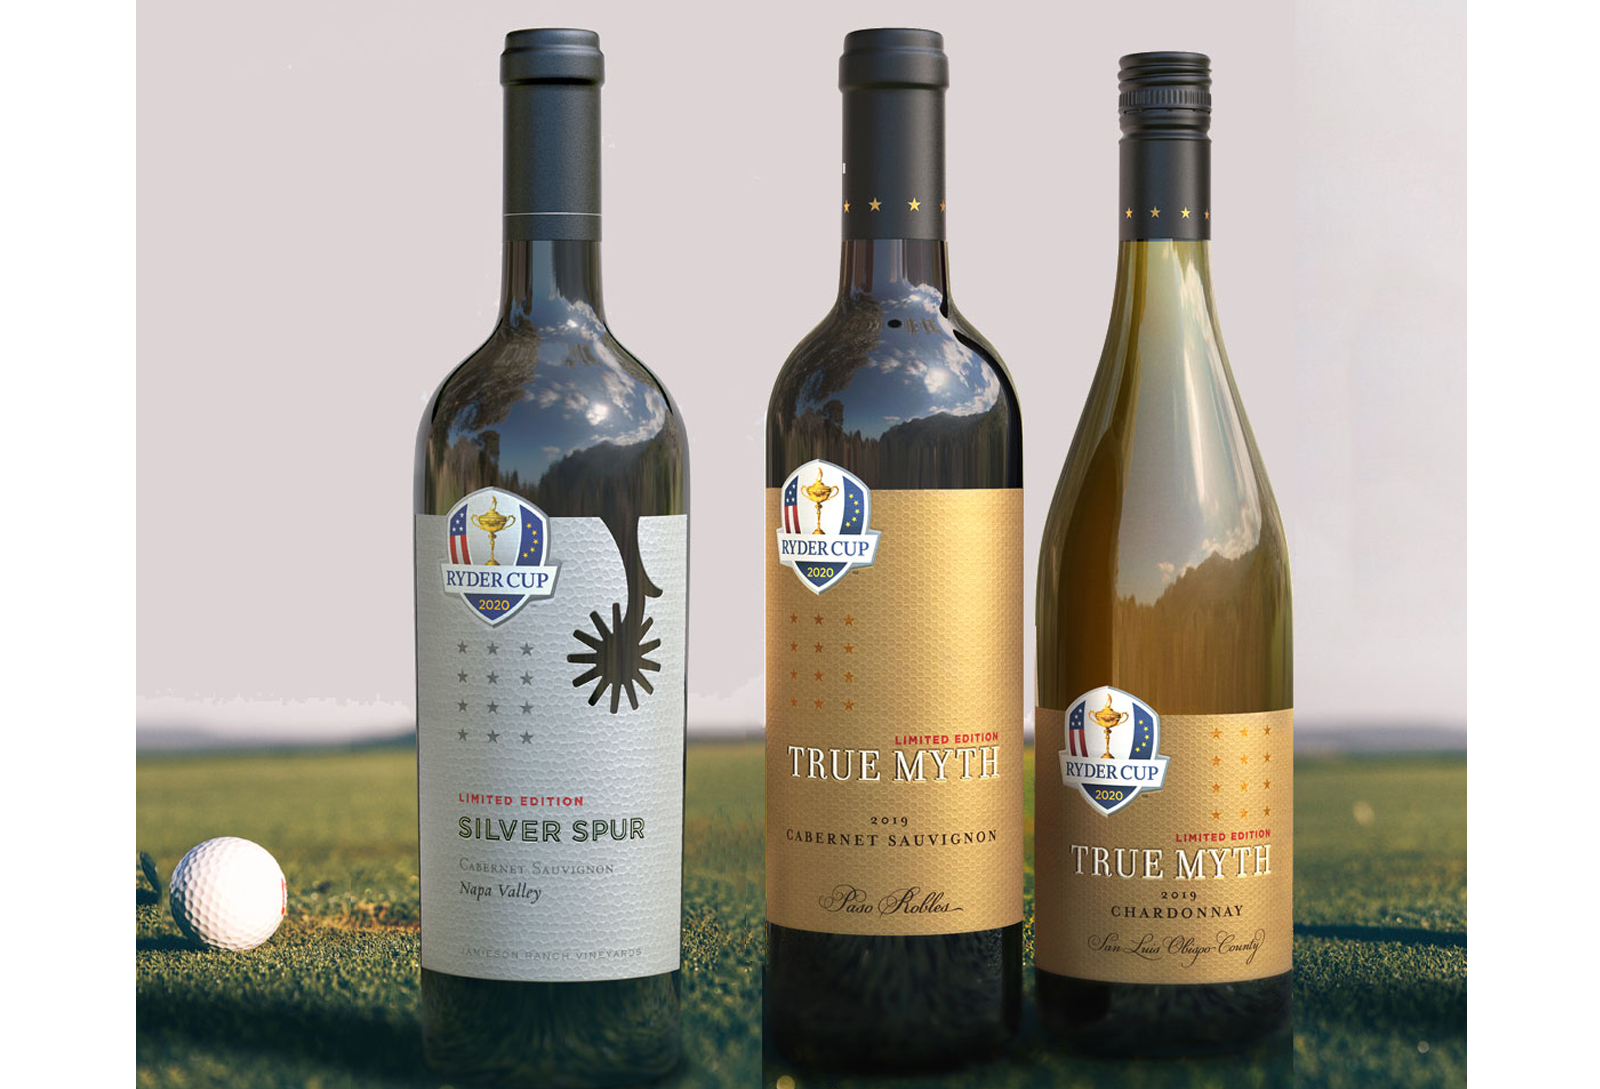 Silver-Spur-and-True-Myth-Limited-Edition-Ryder-Cup-Wine-